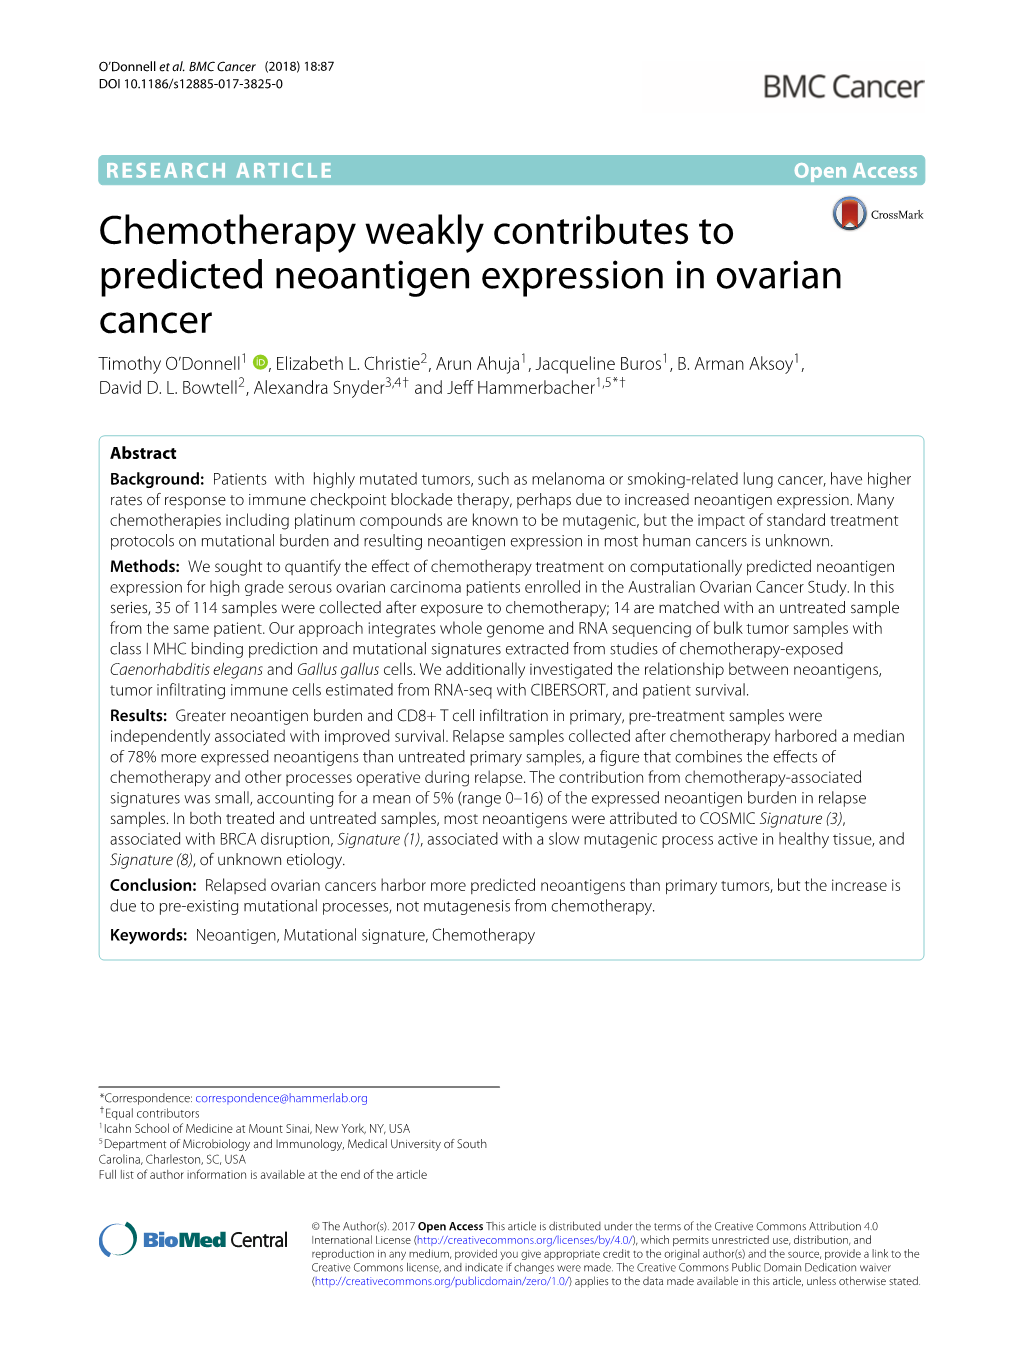 Chemotherapy Weakly Contributes to Predicted Neoantigen Expression in Ovarian Cancer Timothy O’Donnell1 , Elizabeth L